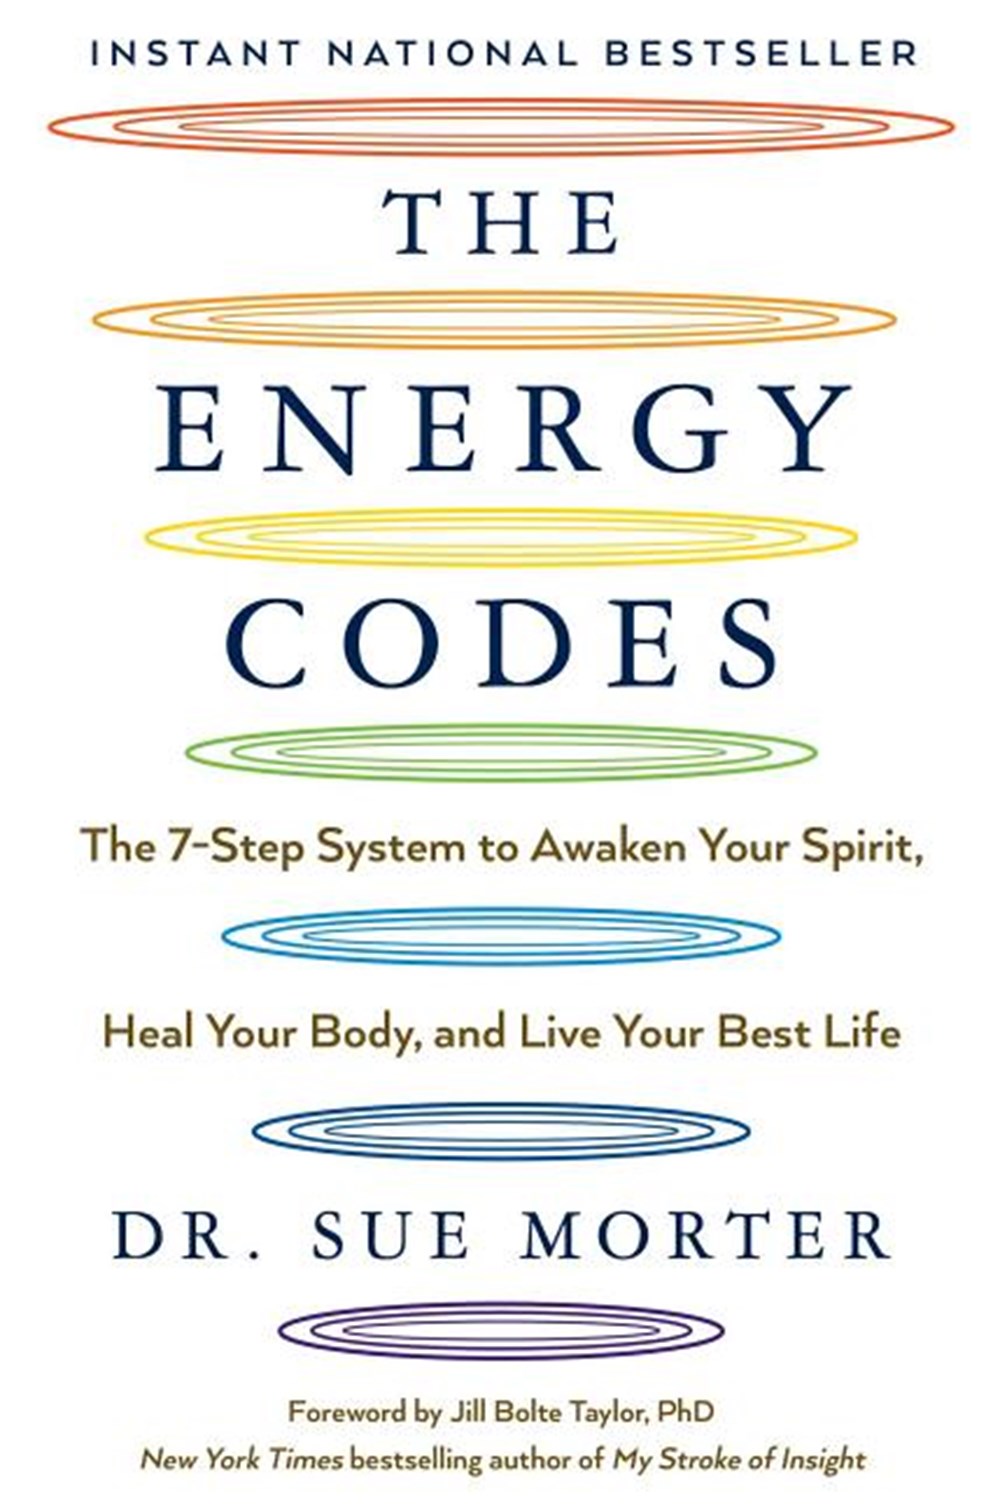 Energy Codes The 7-Step System to Awaken Your Spirit, Heal Your Body, and Live Your Best Life